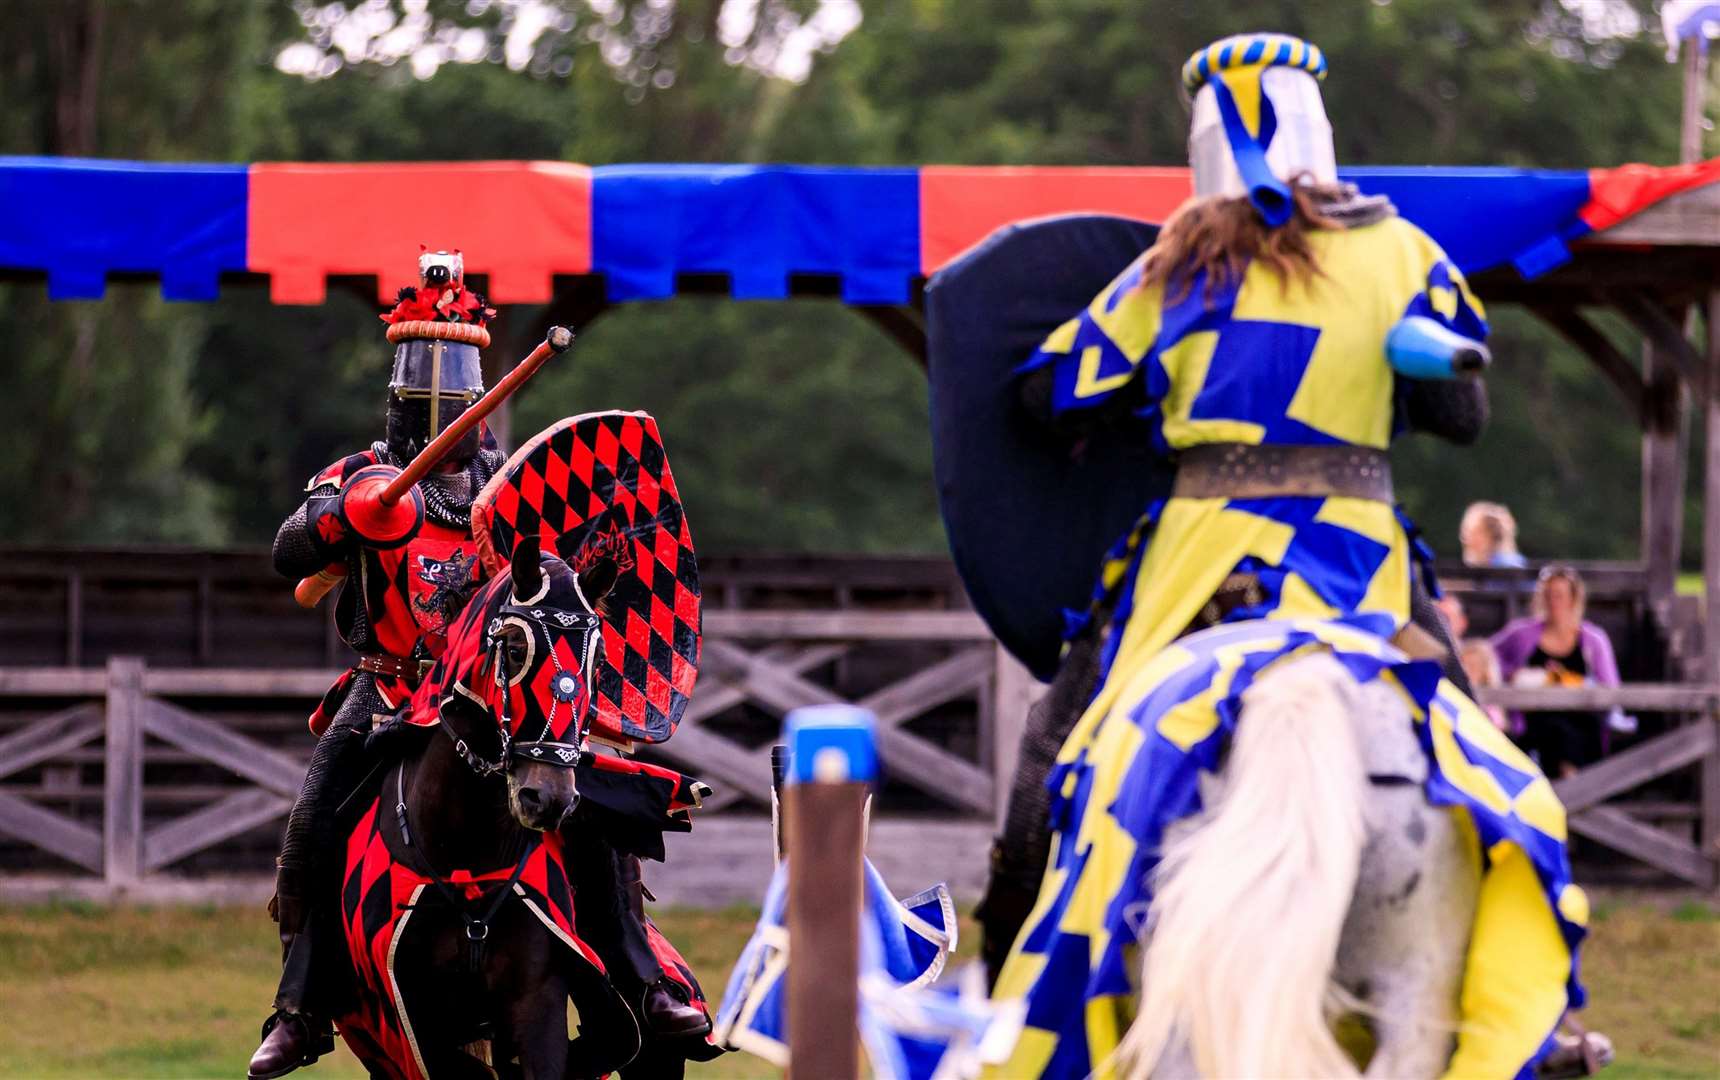 The jousting tournaments return to Hever Castle this summer. Picture: Ollie Dixon